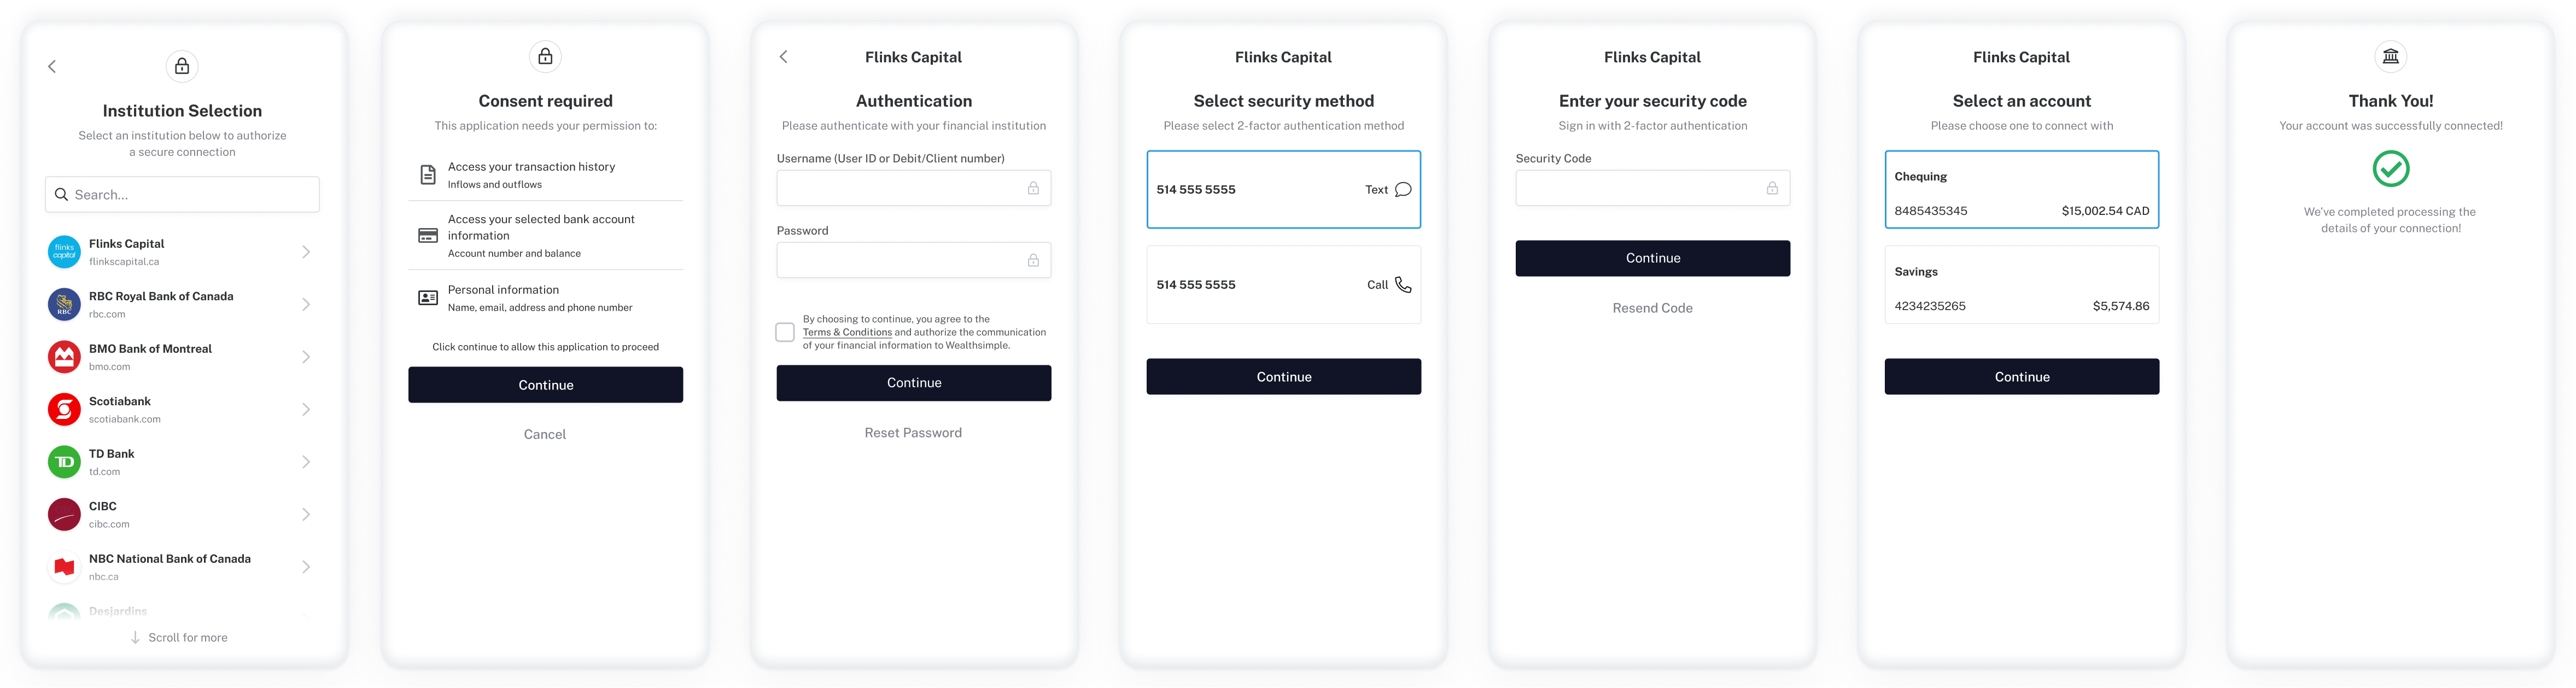 example of flinks connect that uses credential sharing